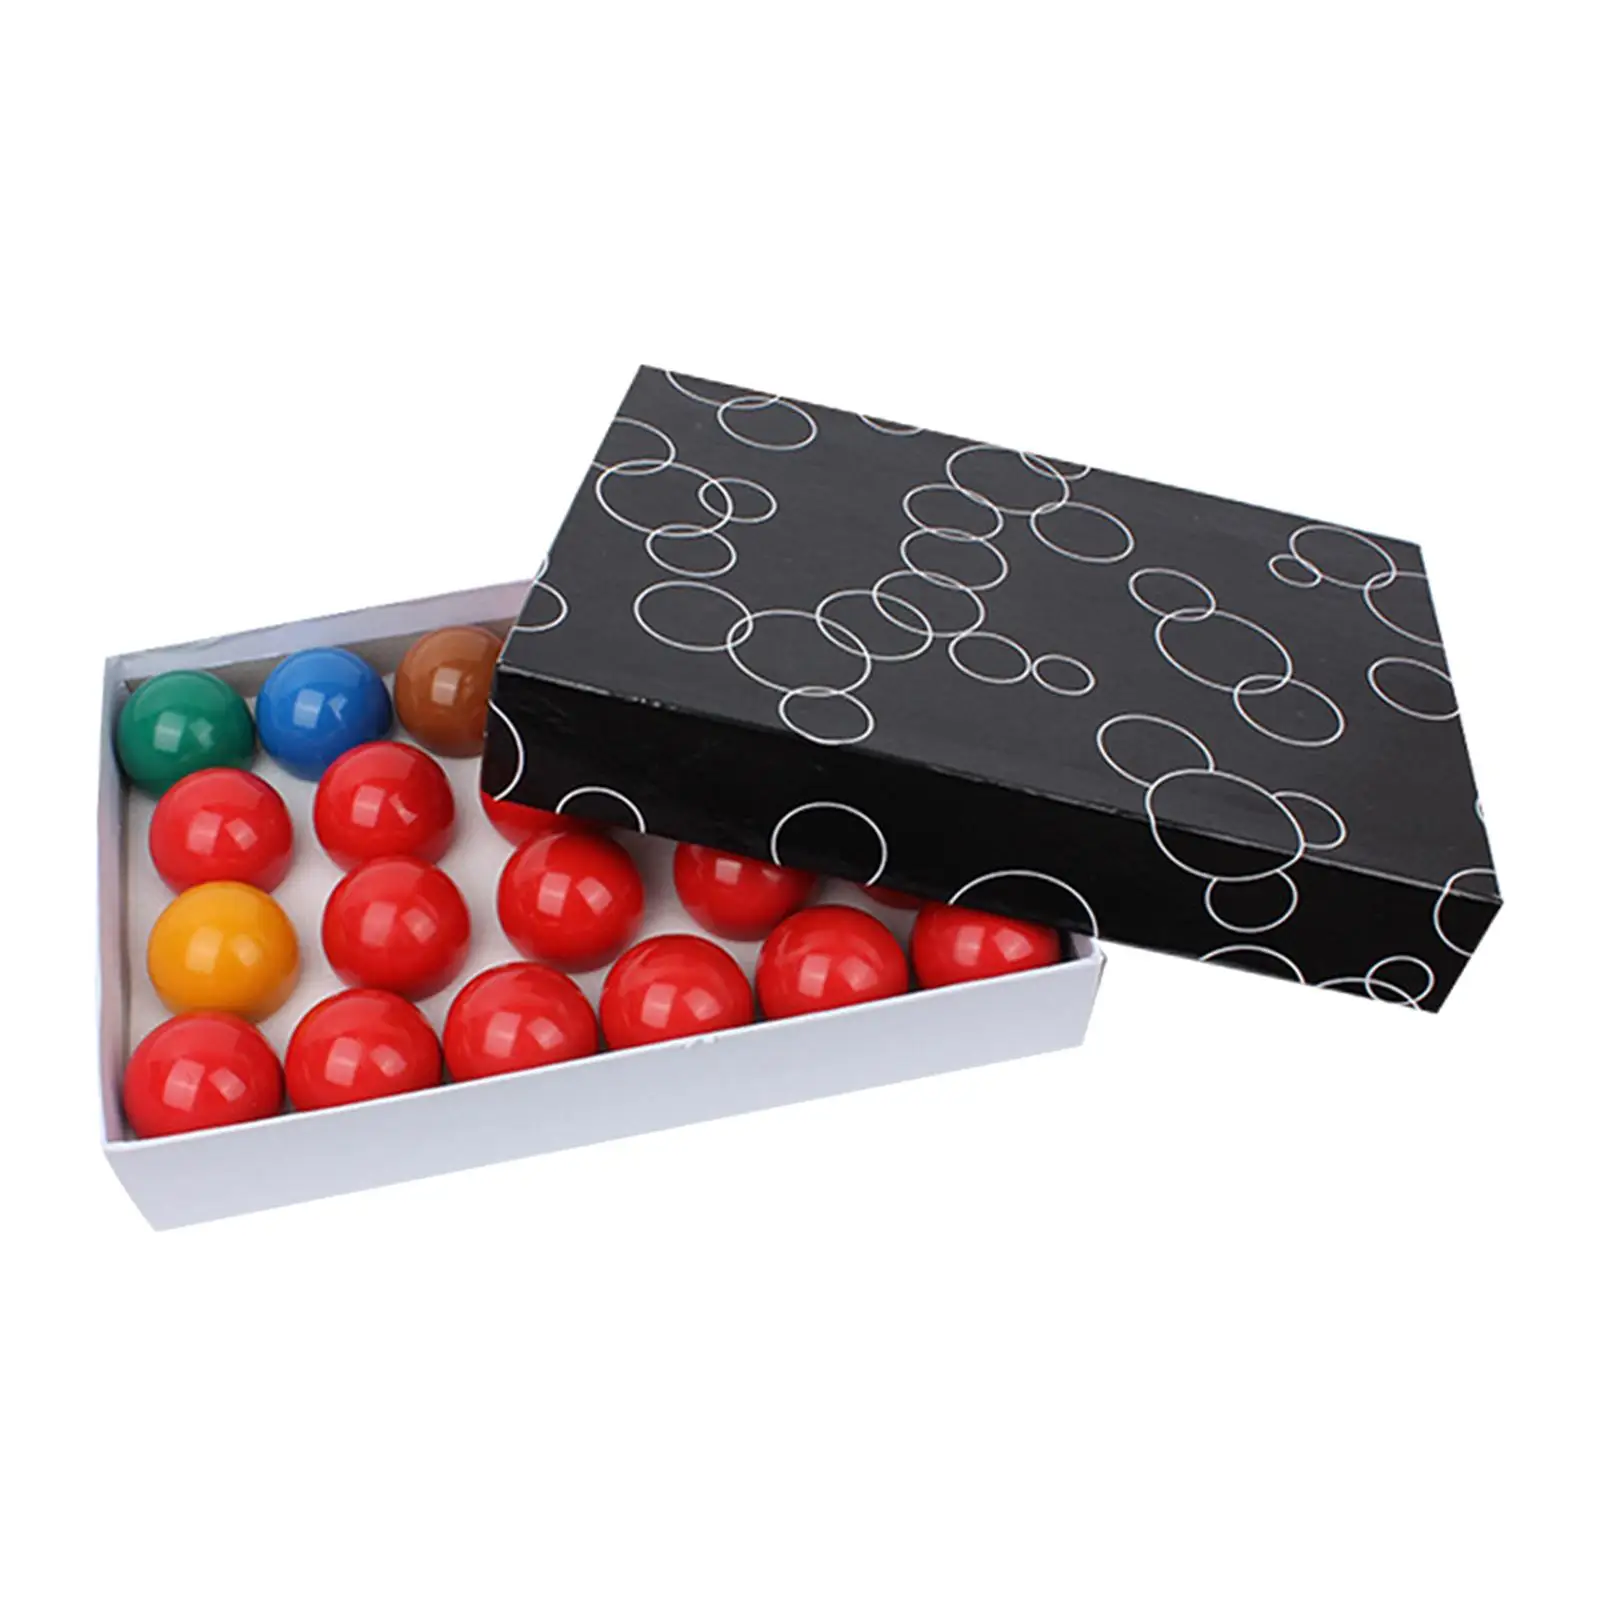 22x Billiard Balls Set, Pool Table Balls Professional 50.8mm Resin Colorful Practice Ball Snooker Ball Set for Gaming Rooms